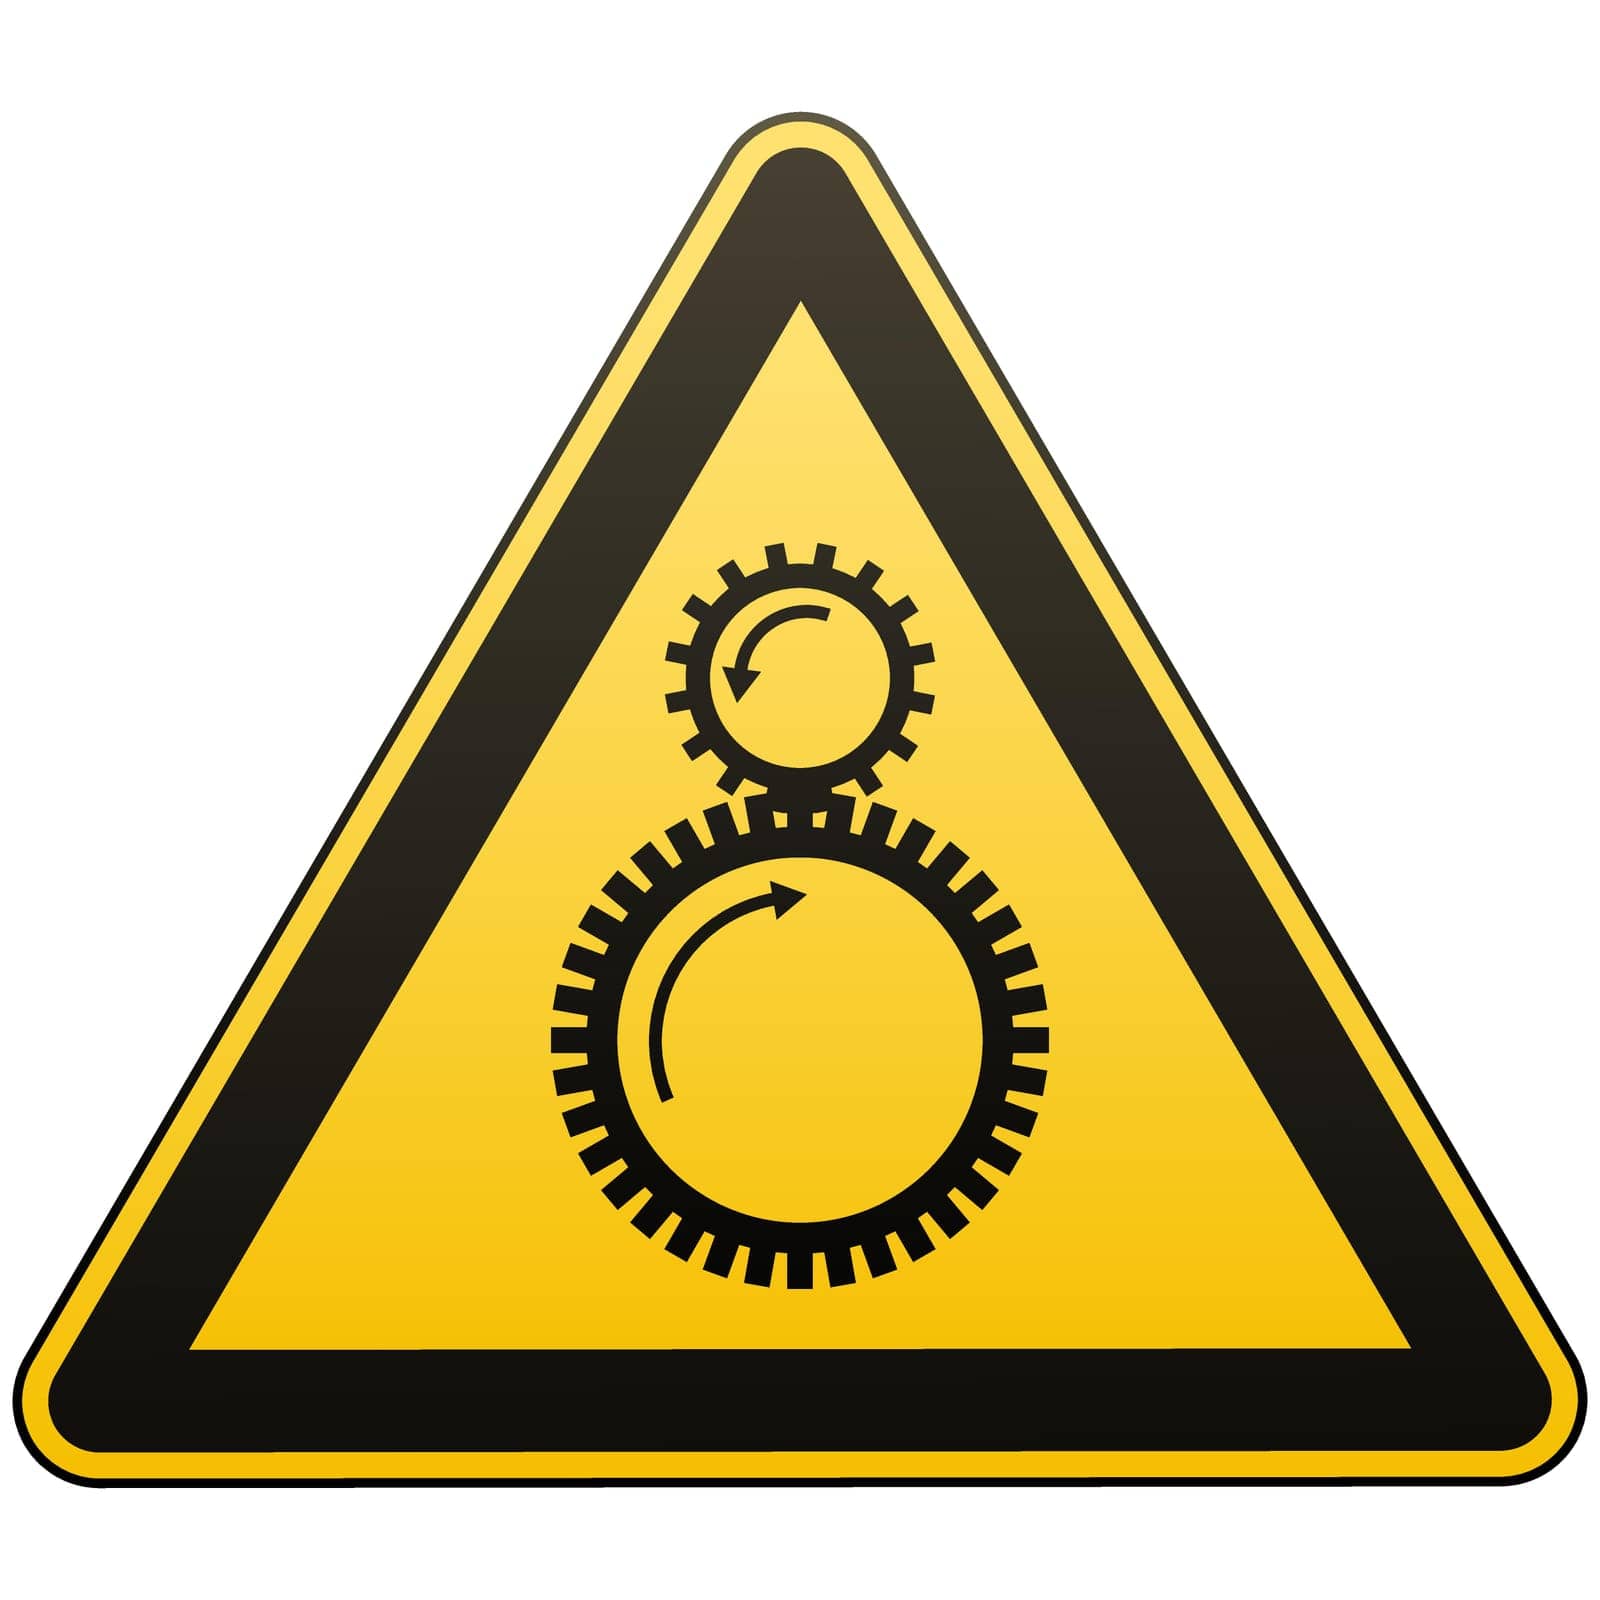 Carefully tightening between rotating elements is possible. Attention is dangerous. Warning sign. Safety precautions. Yellow triangle with black image. Isolated object on white background. Vector by Nikolaiev_Oleksii